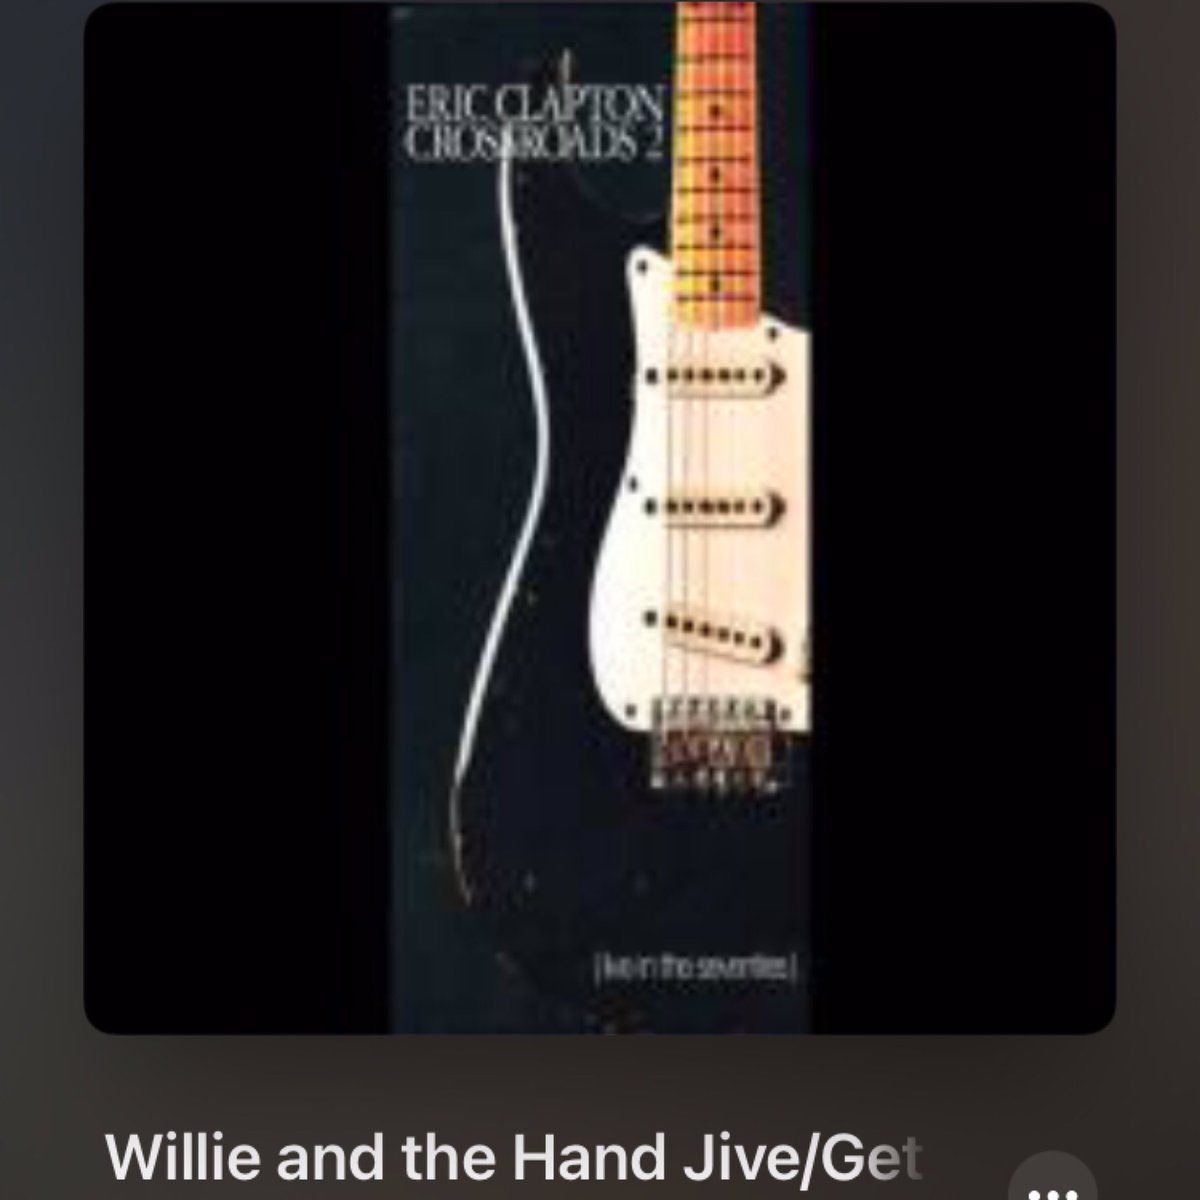 #NowPlaying
🎵 Willie and the Hand Jive/Get Ready [Live at Long Beach Arena, Long Beach, California, July 20, 1974]
by 🎵 Eric Clapton
from 🎵 Crossroads 2 (Live in the Seventies) Disc 1
#carlradle #swamprock #70s #boxset 
#LongBeachArena #1974